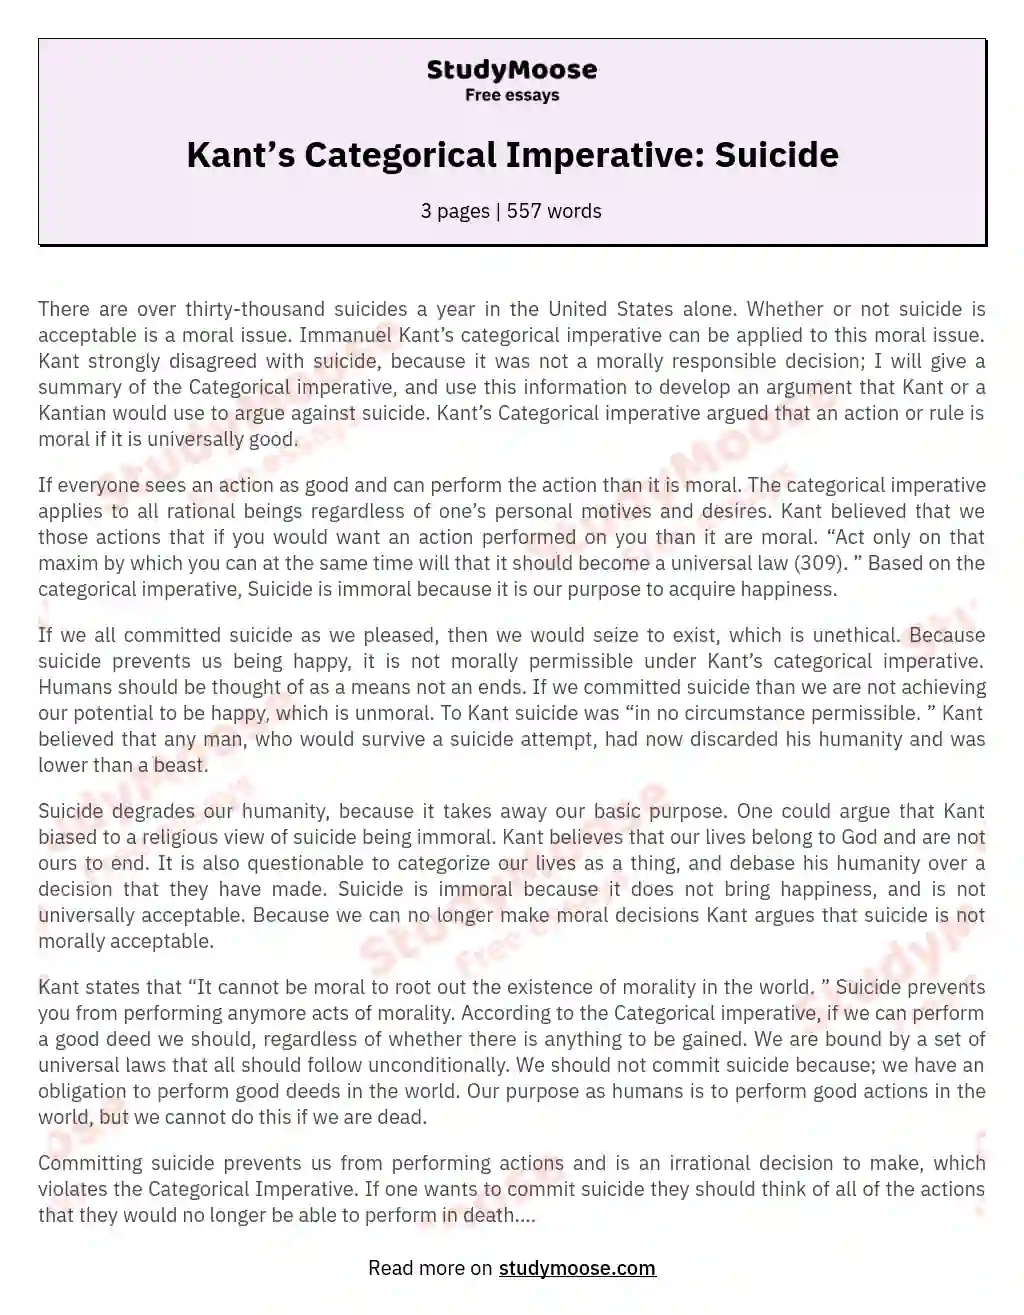 Kant’s Categorical Imperative: Suicide